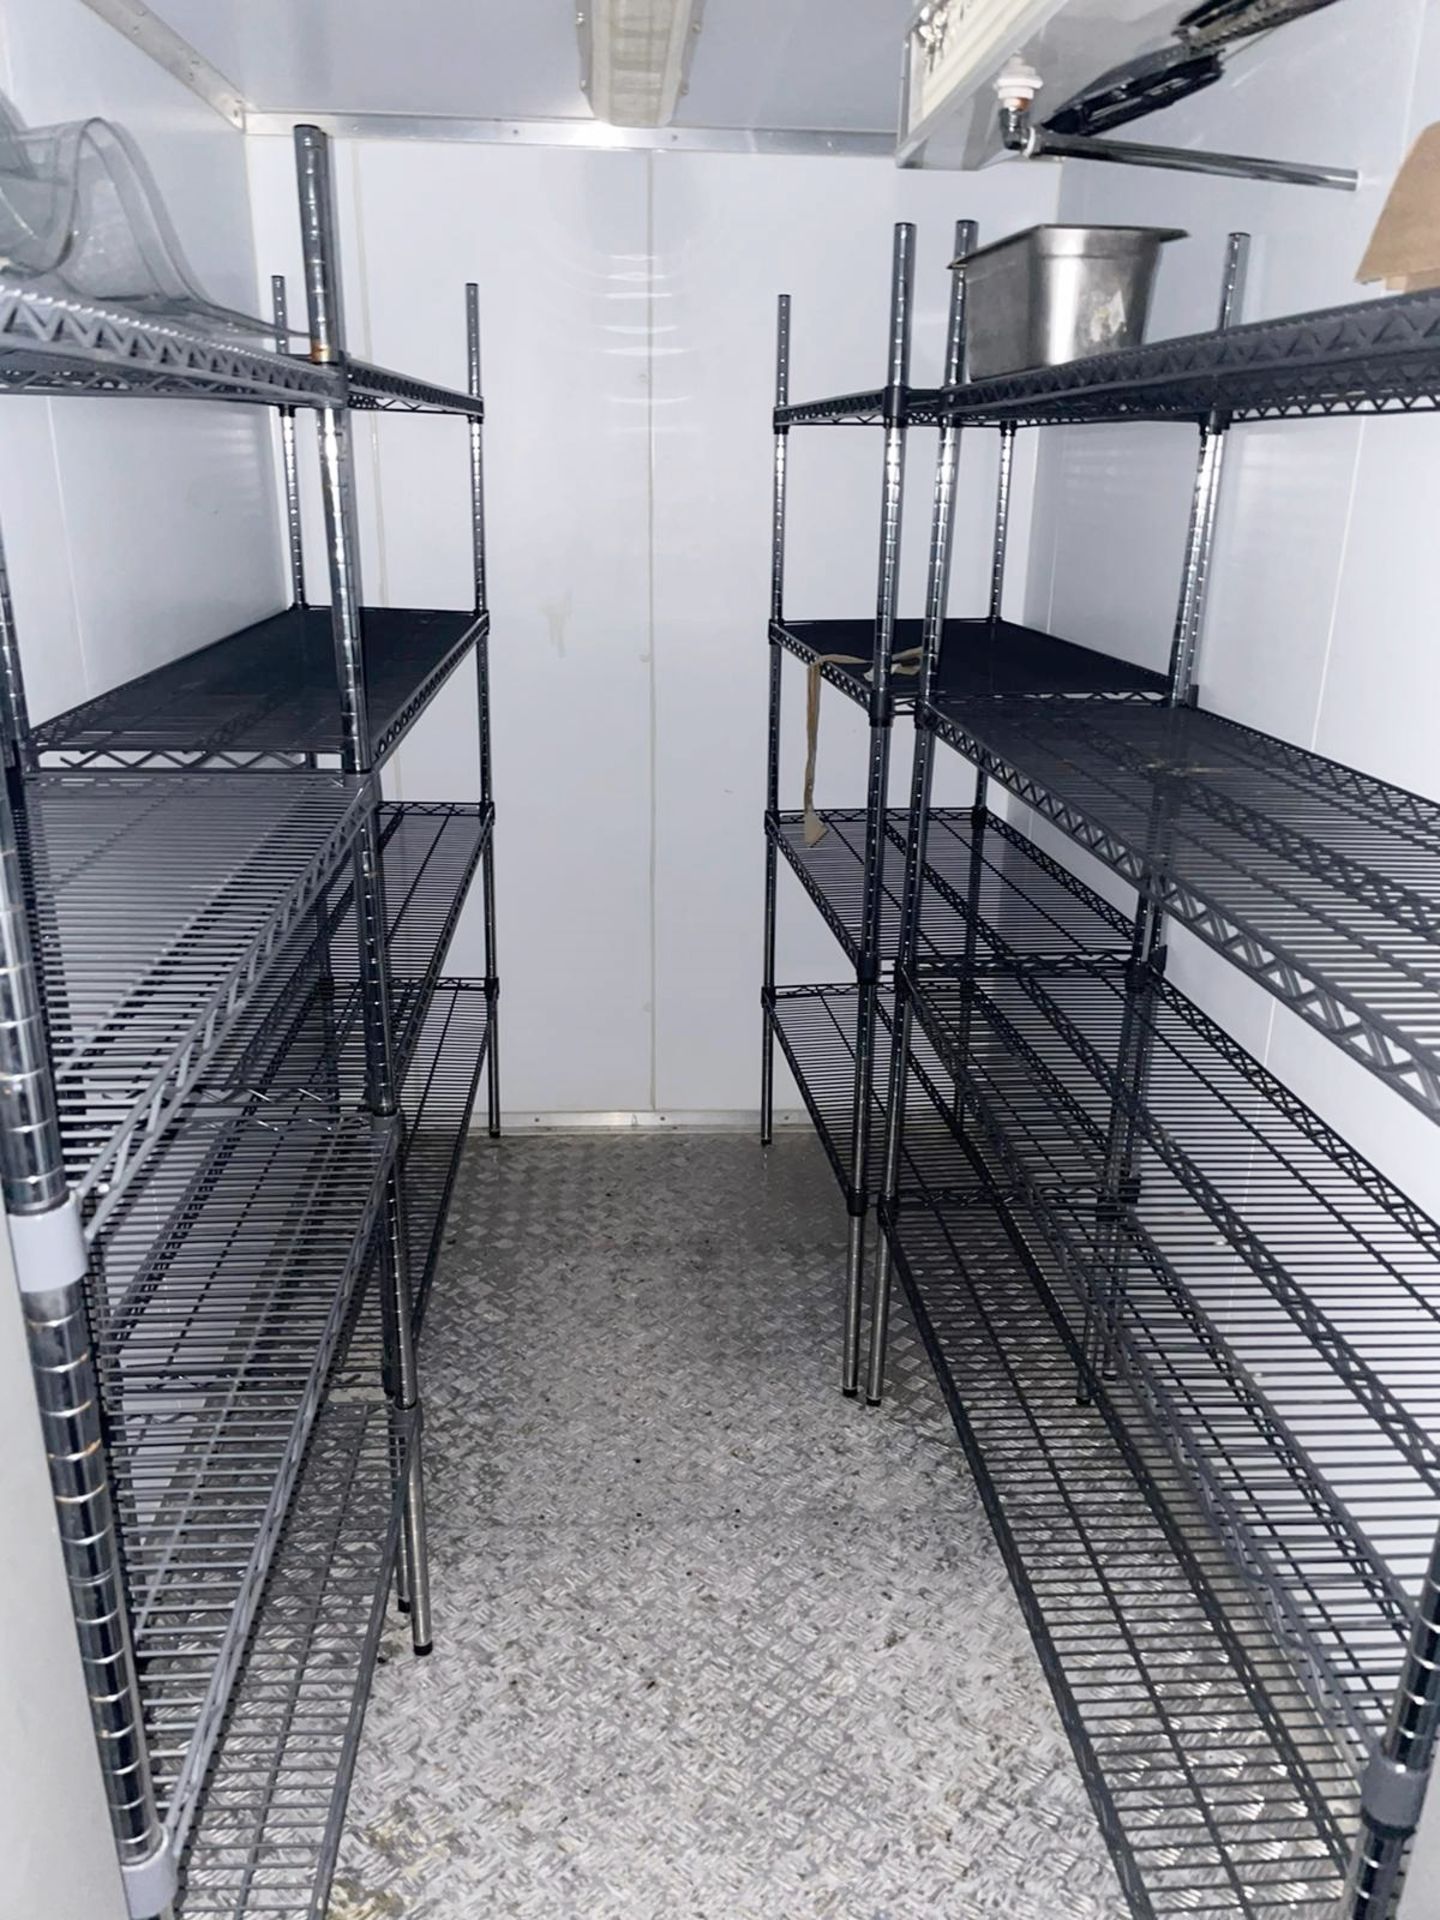 4 x Walk in Freezer Wire Shelves in Chrome - CL674 - Location: Telford, TF3 Collections: This item